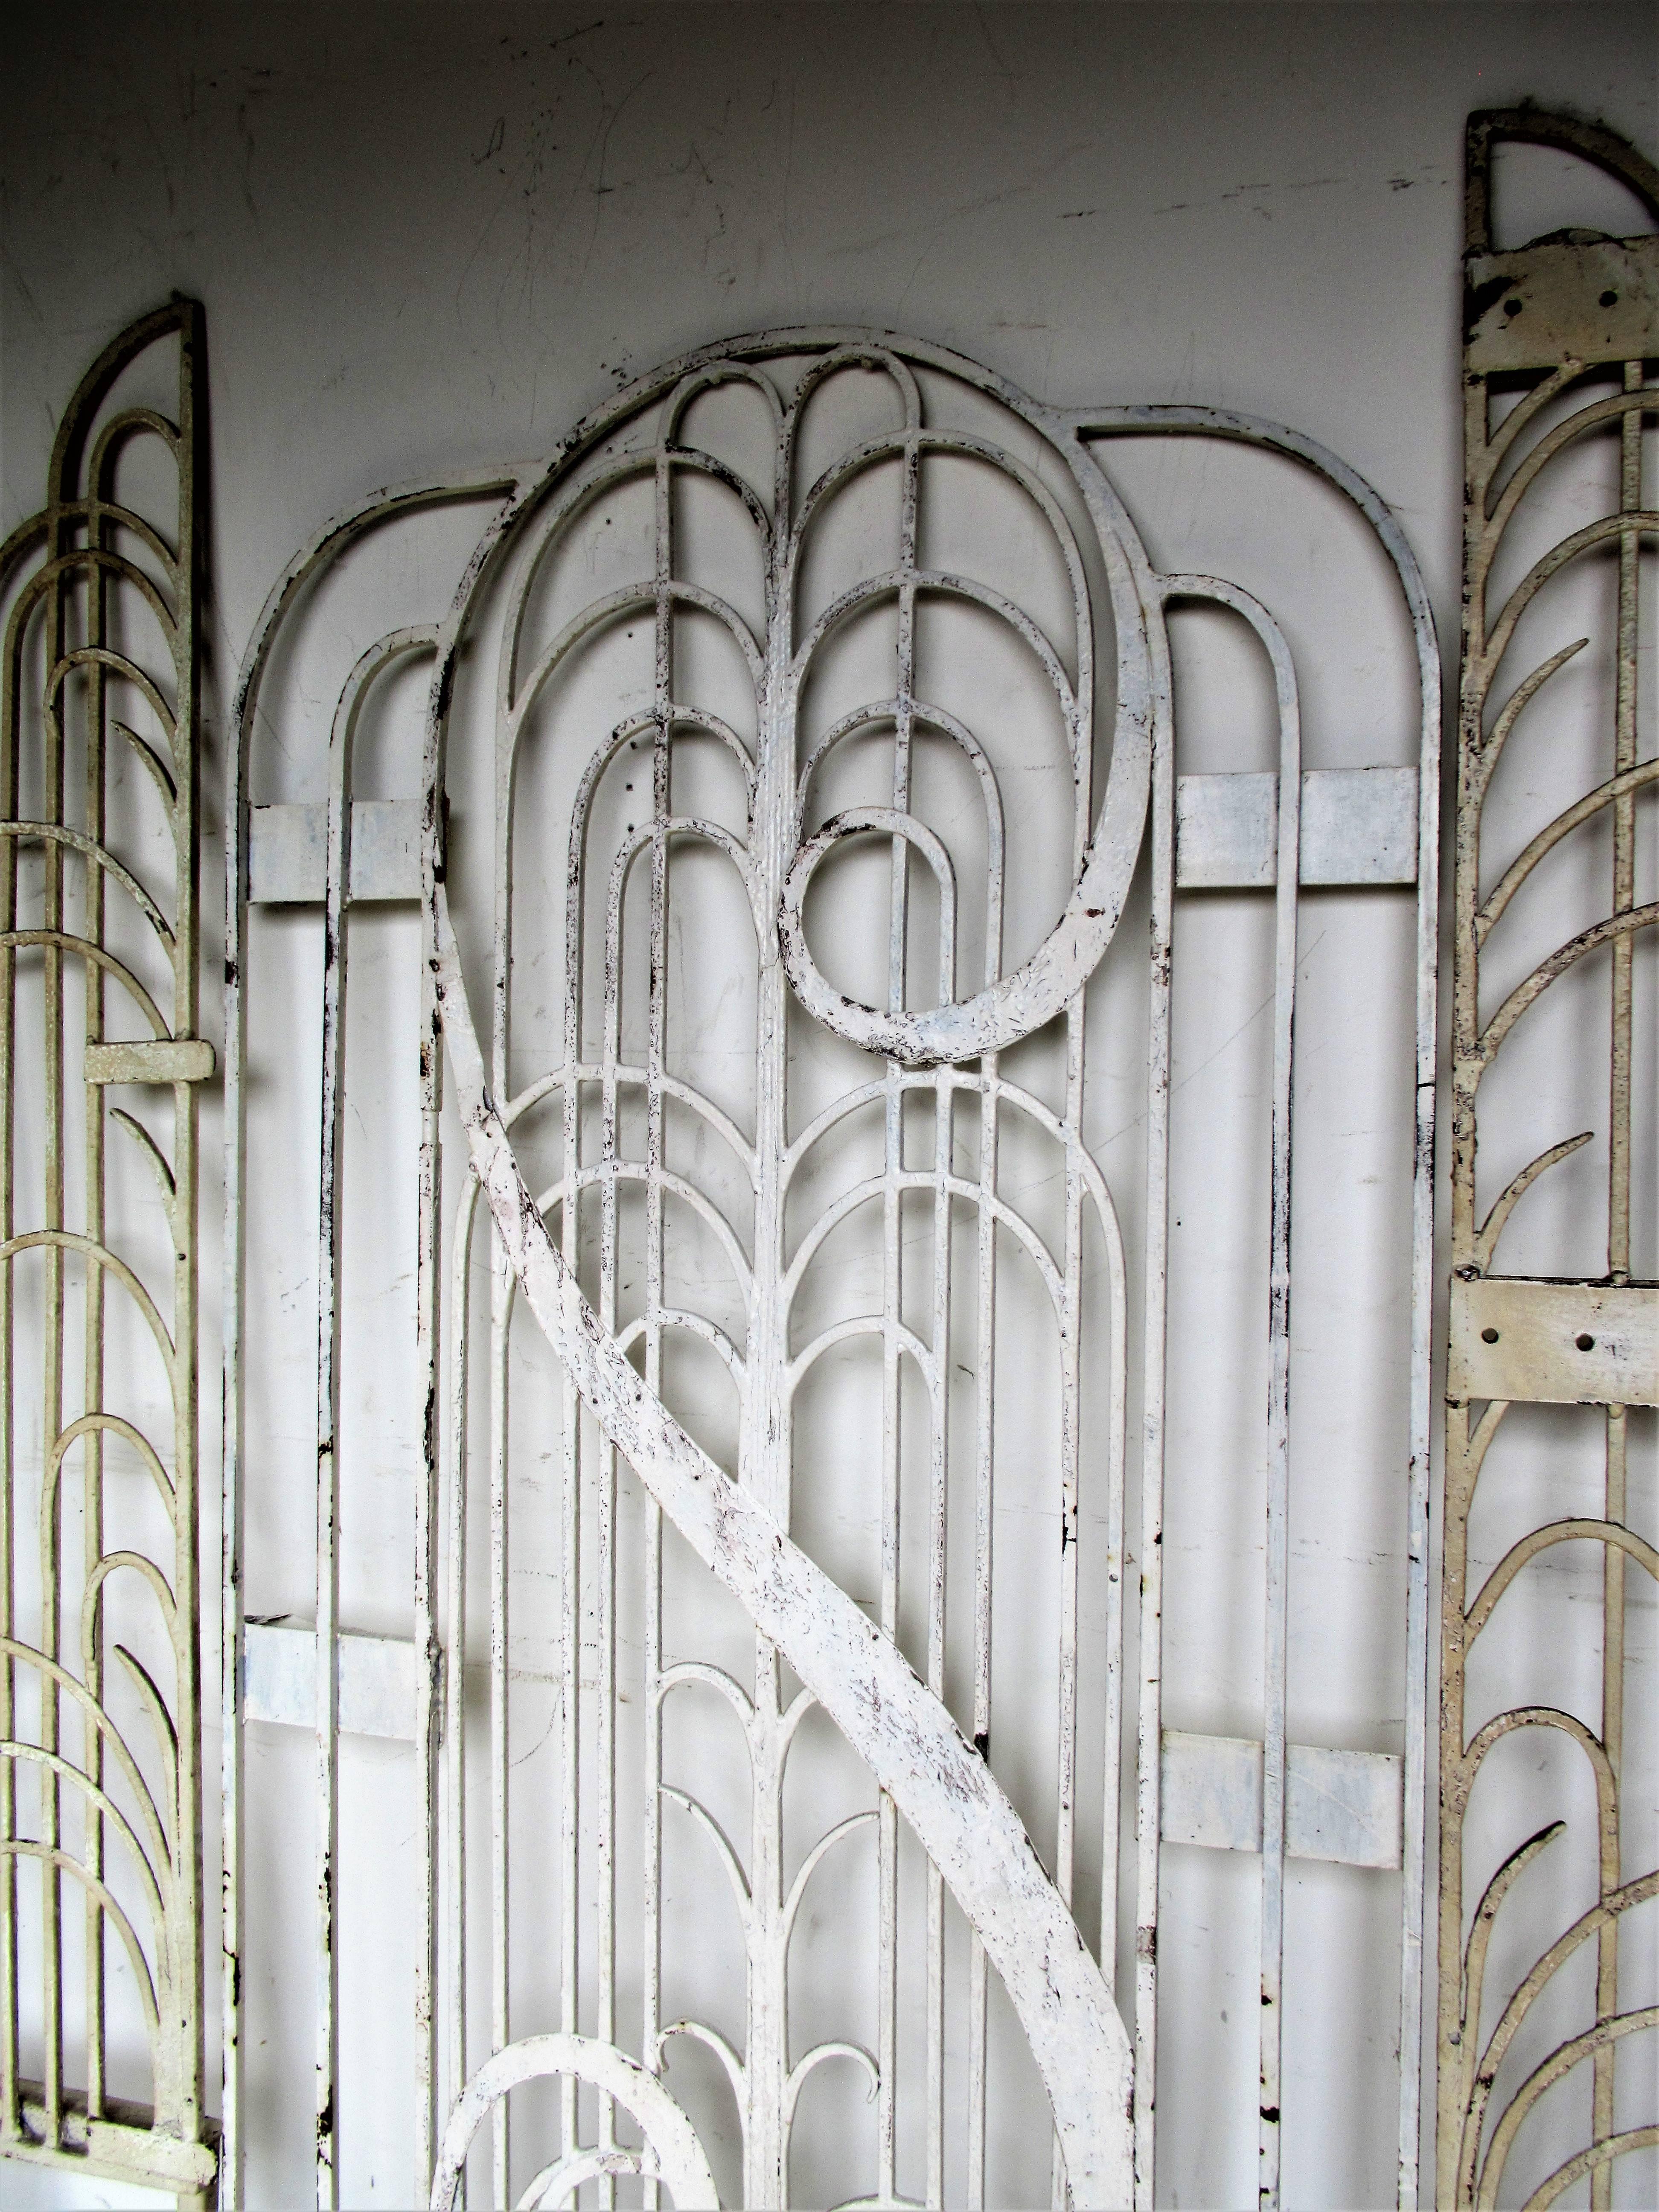 1930s American Art Deco iron gates / large centre section and two side sections in old white and cream painted surface. Hand-wrought by Perrine Bros. Ornamental Iron Co. Topeka, Kansas.